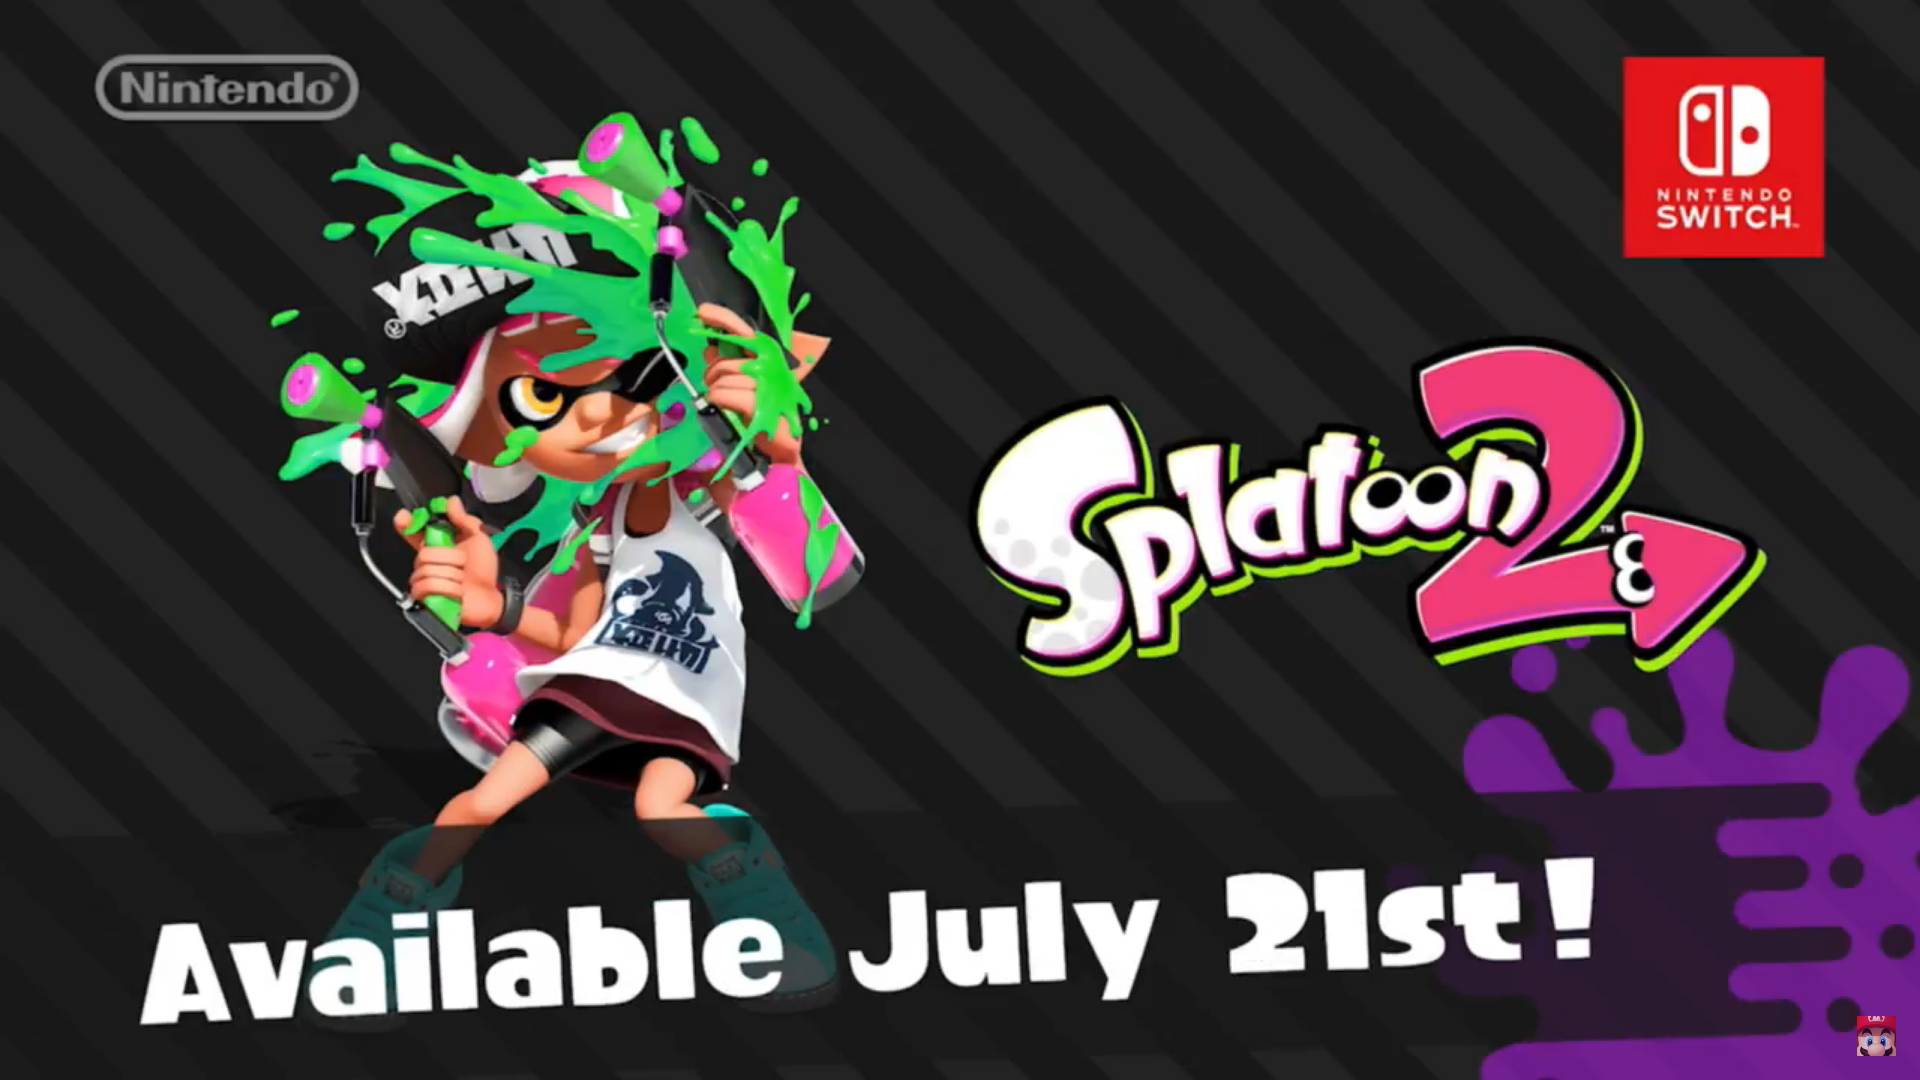 Rewatch The Nintendo Direct With Arms And Splatoon Here